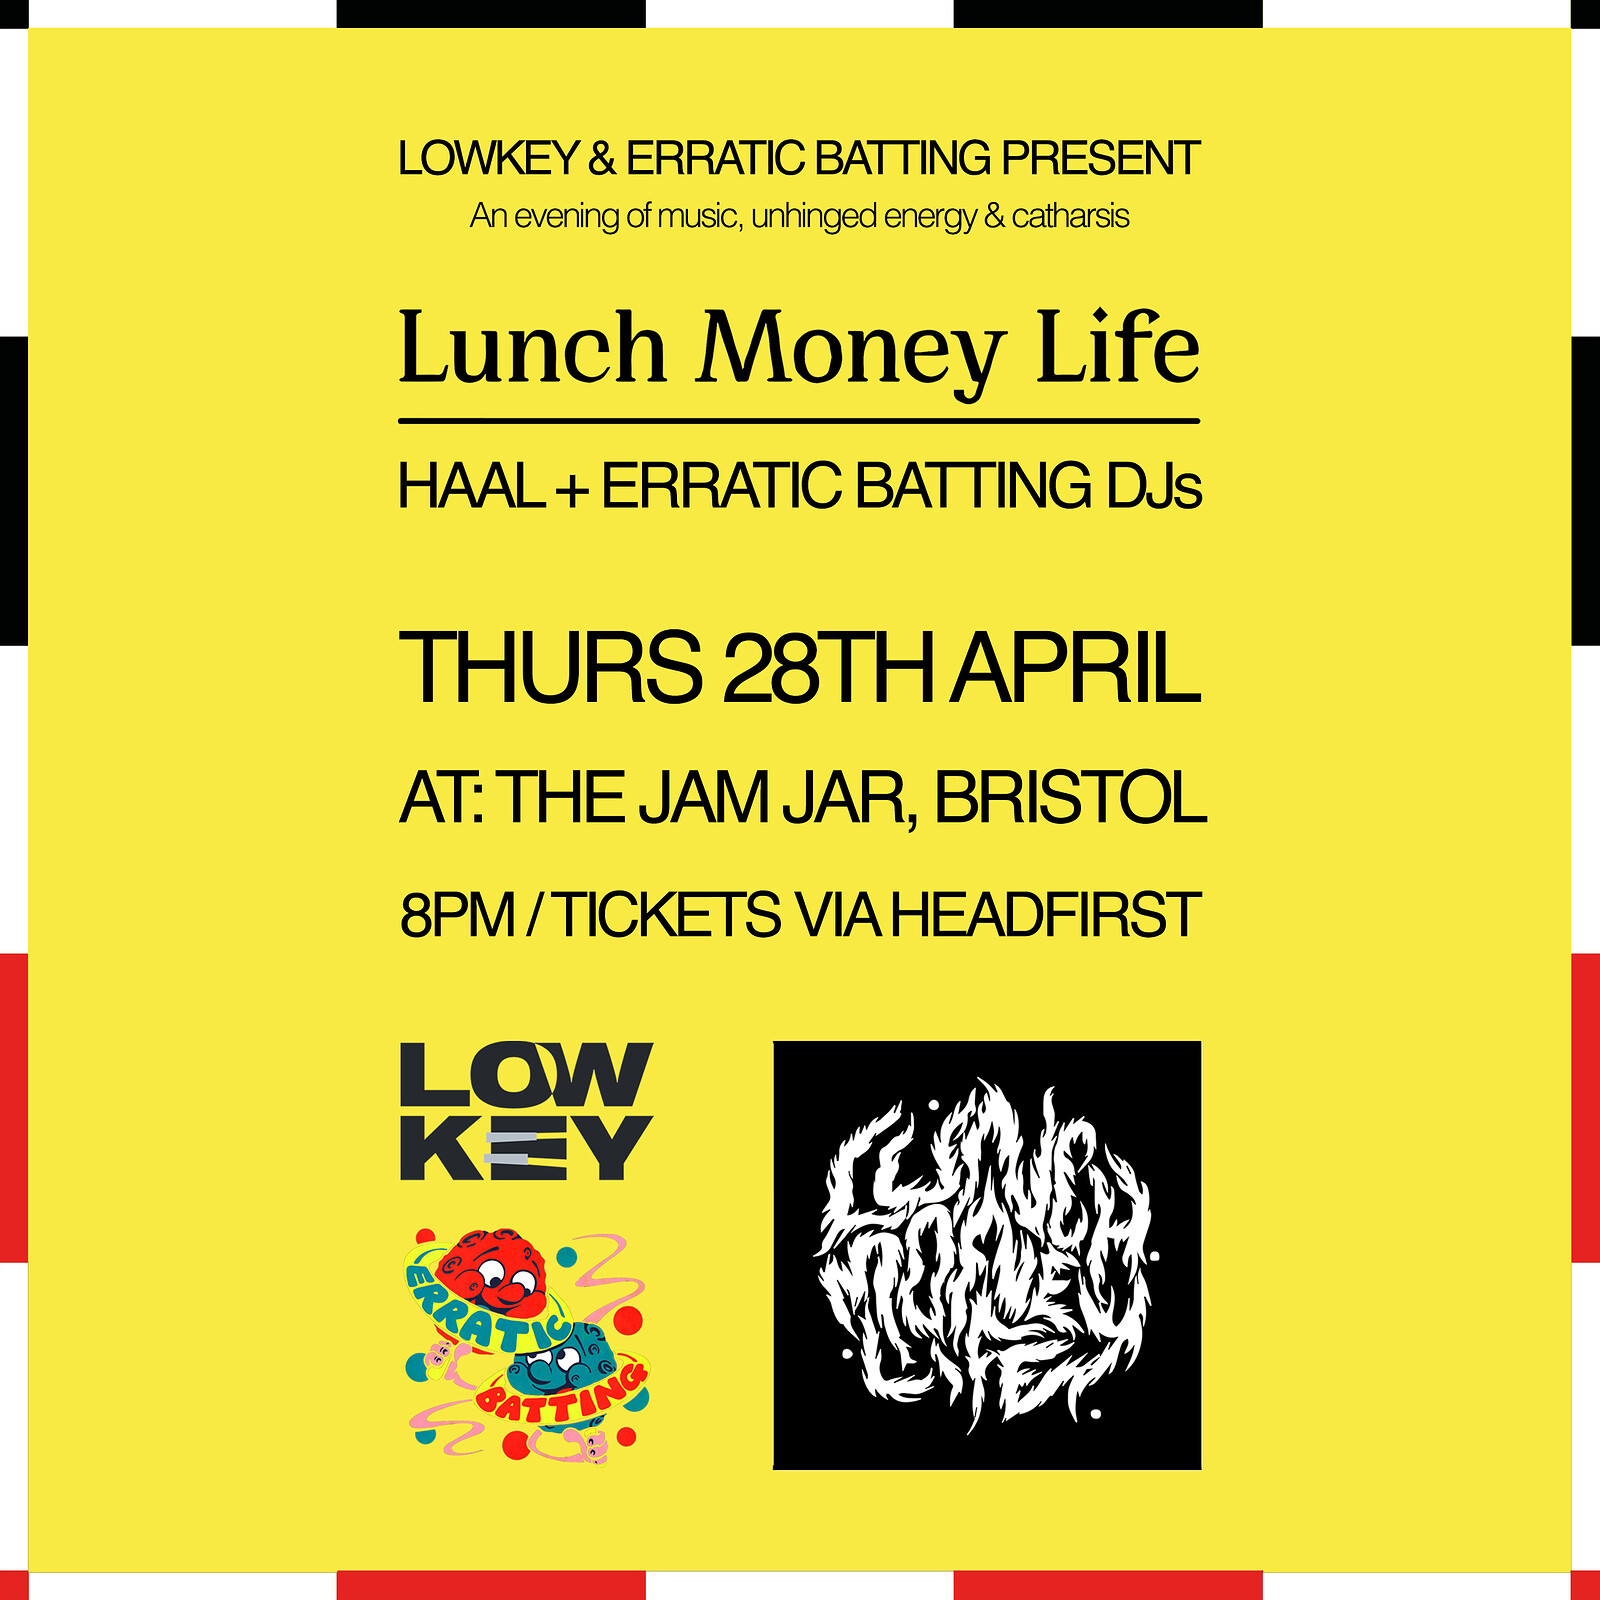 Lunch Money Life + HAAL at The Jam Jar